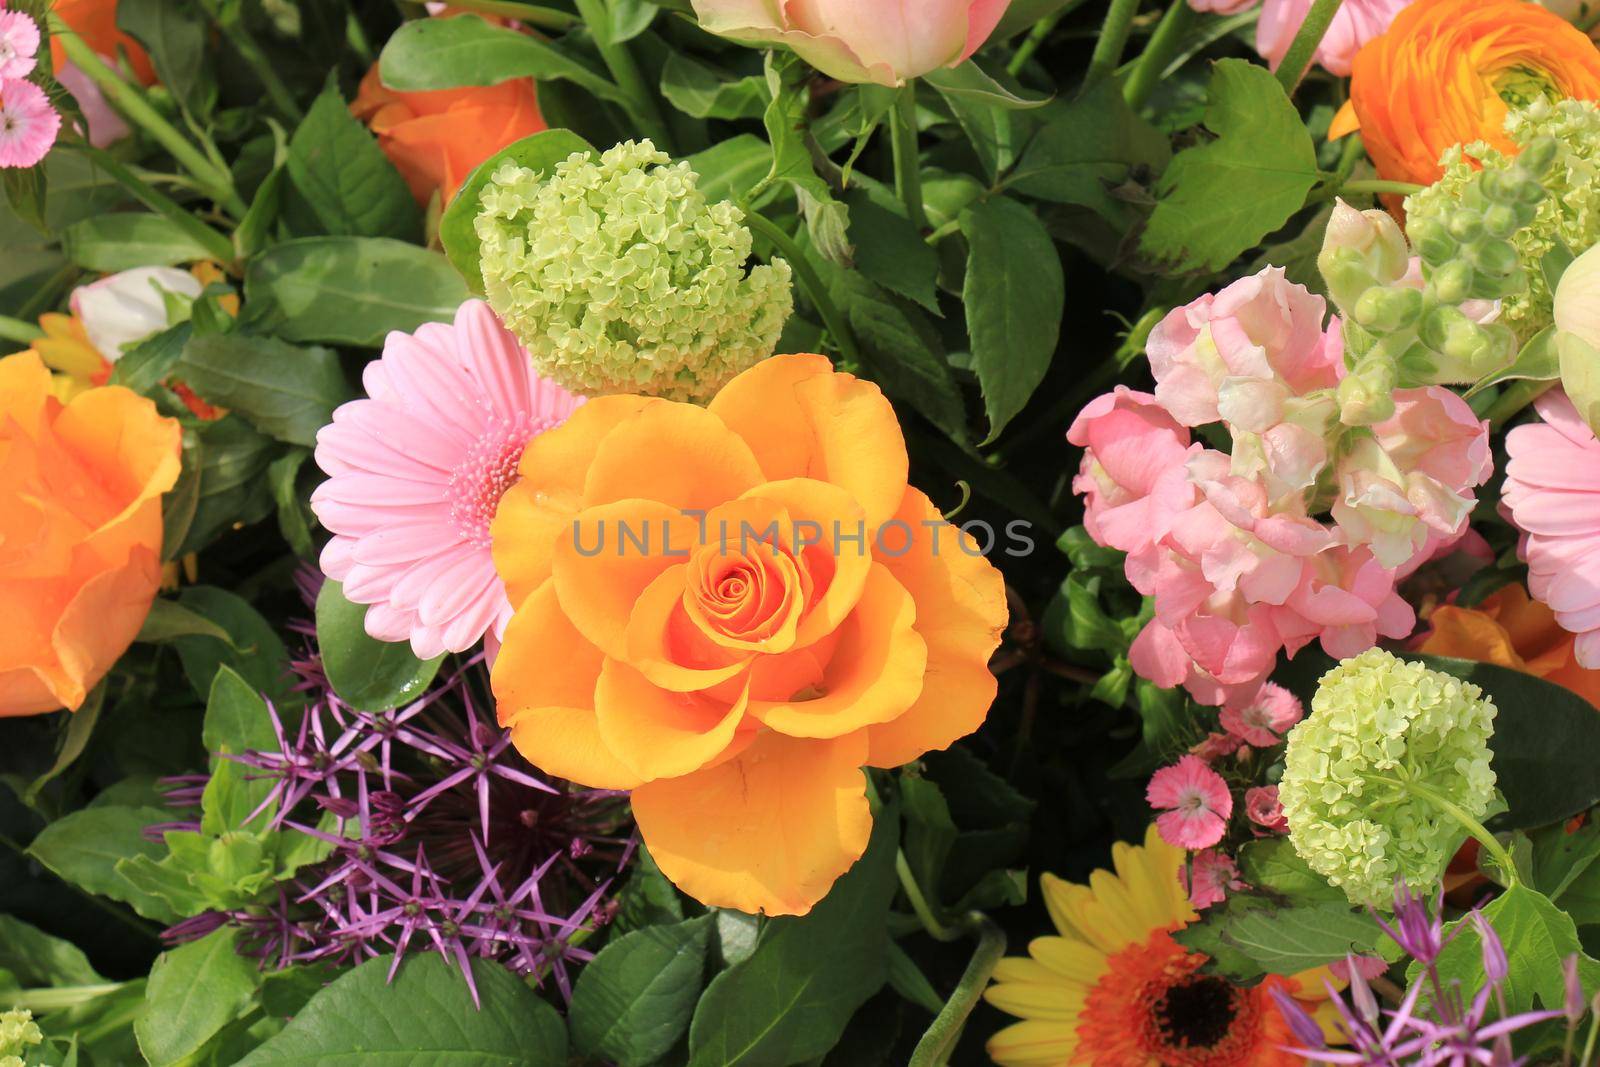 Mixed flower arrangement: various flowers in different shades of pink and orange for a wedding